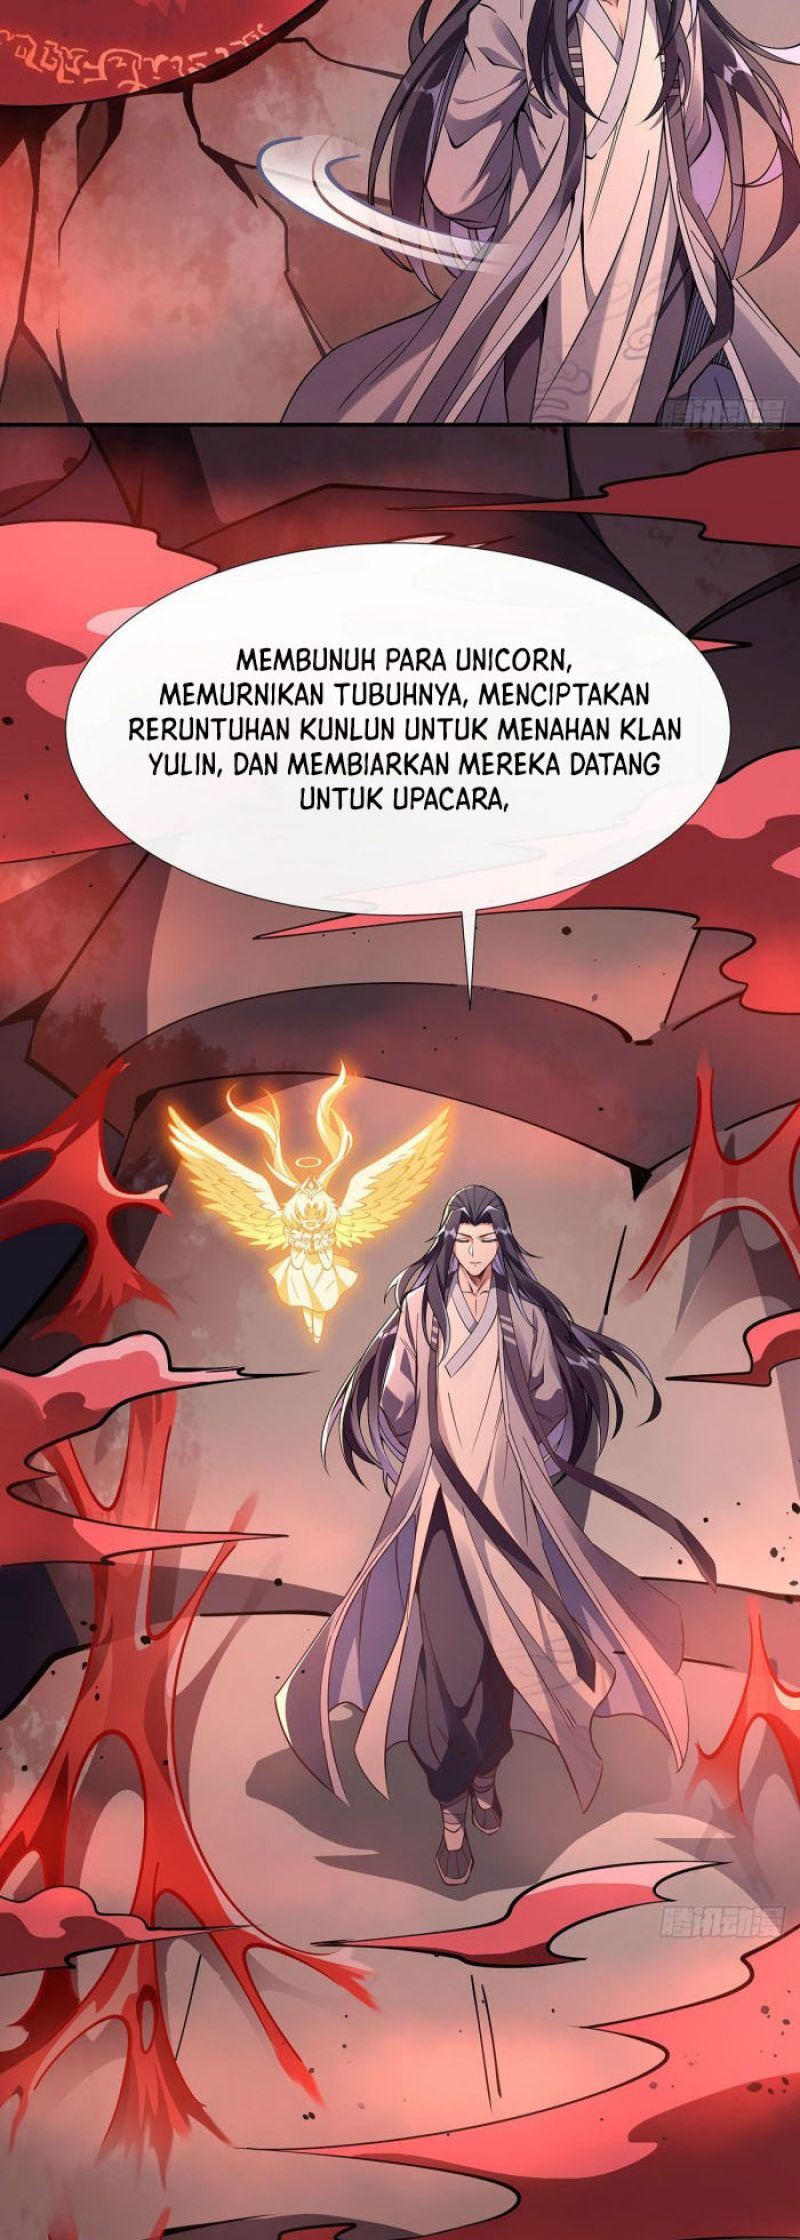 Dilarang COPAS - situs resmi www.mangacanblog.com - Komik my female apprentices are all big shots from the future 123 - chapter 123 124 Indonesia my female apprentices are all big shots from the future 123 - chapter 123 Terbaru 23|Baca Manga Komik Indonesia|Mangacan